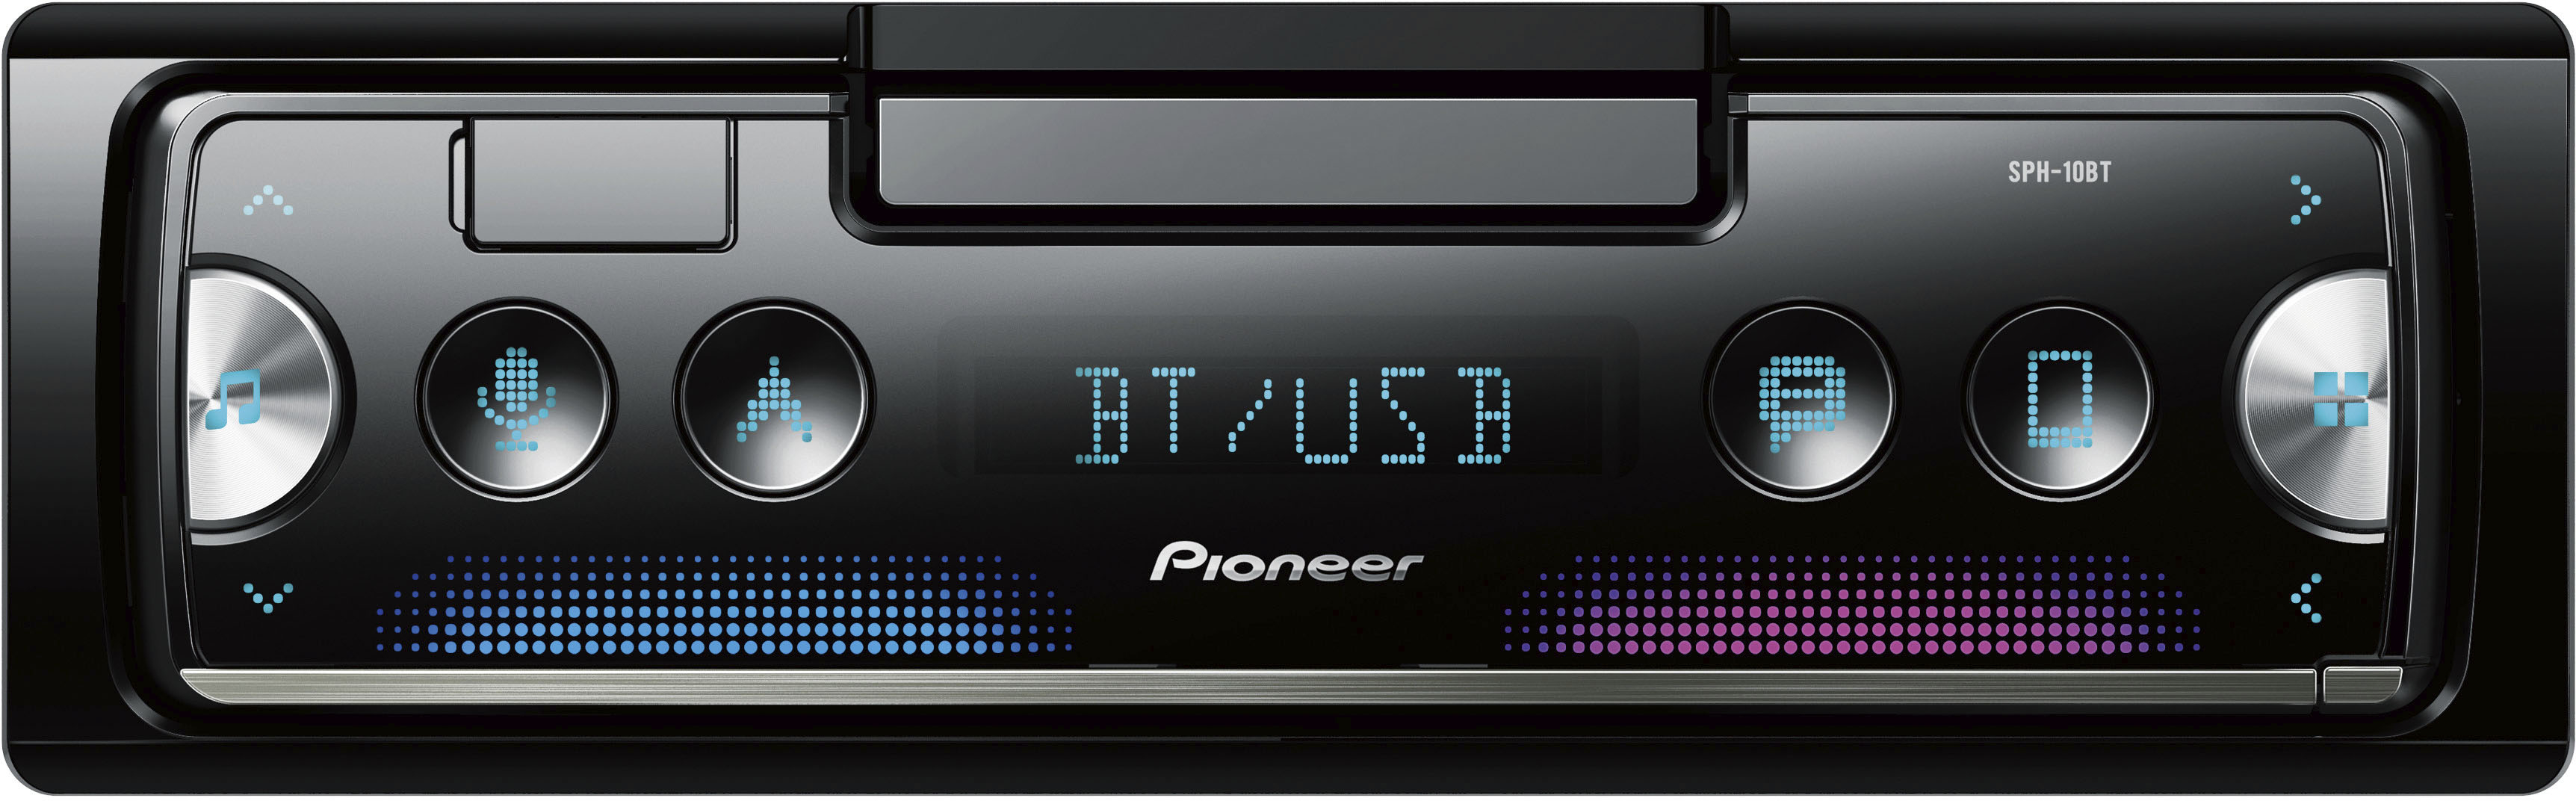 Is Pioneer A Good Brand For Car Audio? Yes & Here's Why